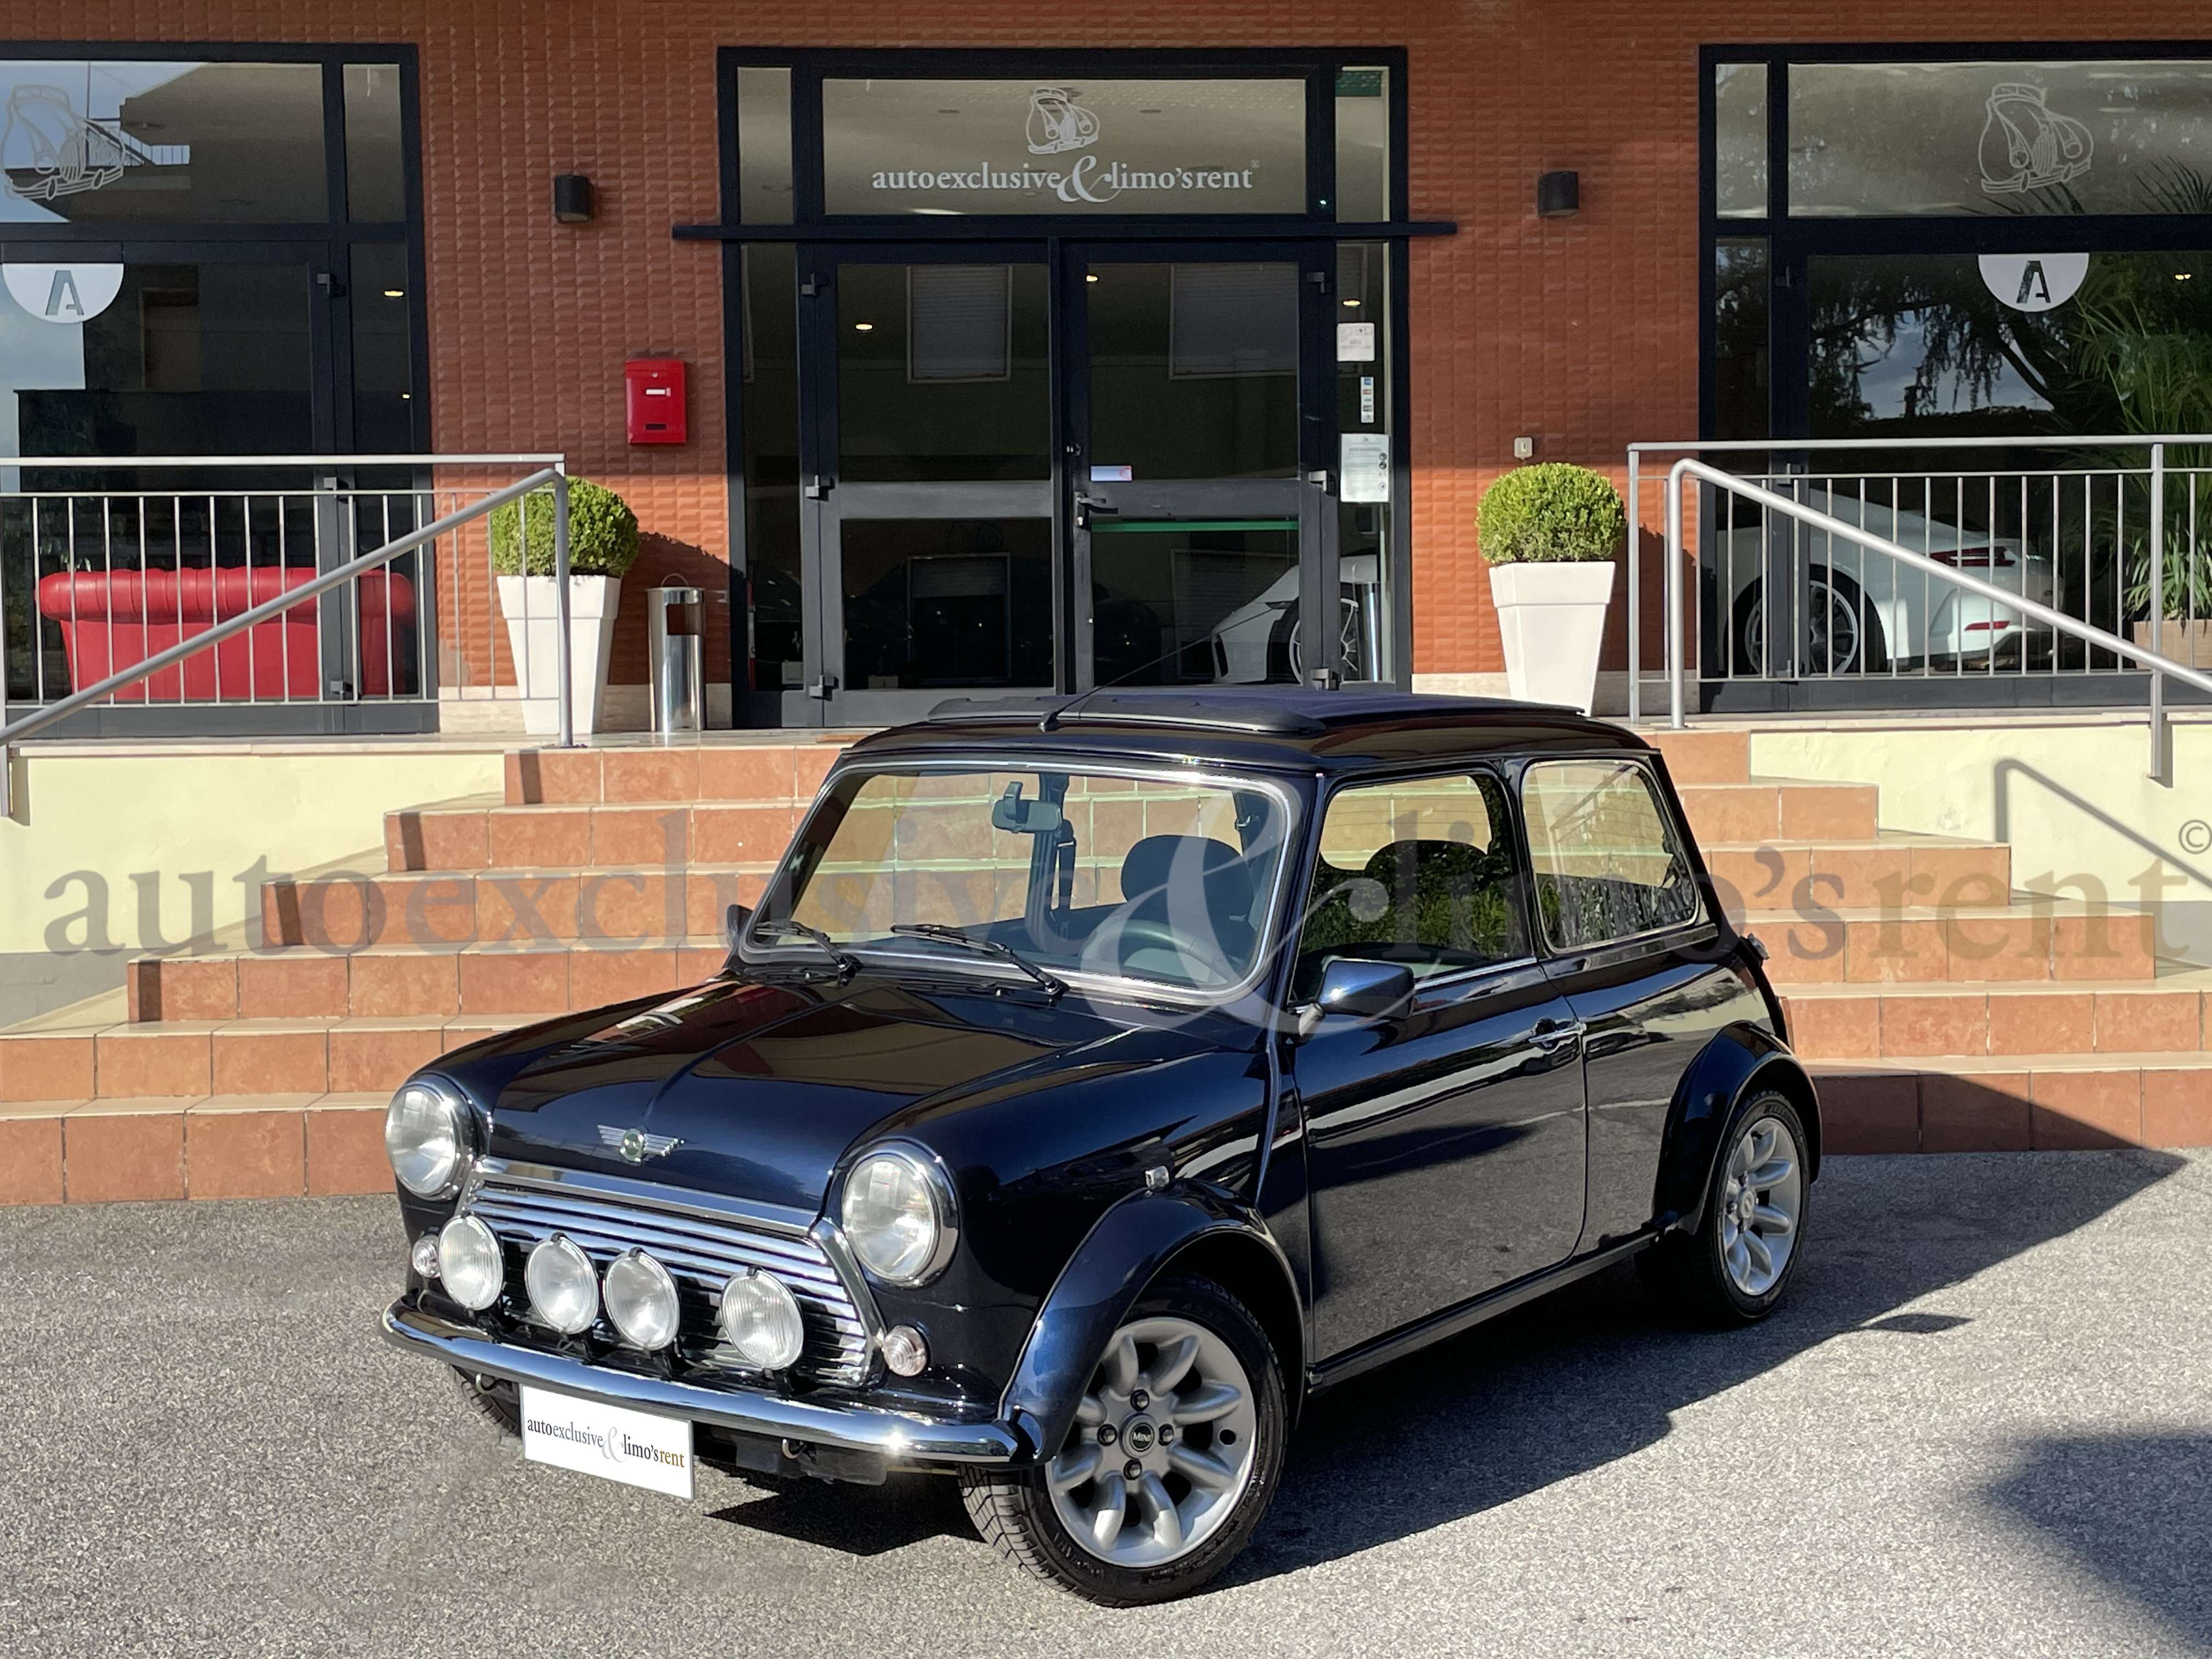 Rover MINI Compact in Blue used in Pistoia - Pt for € 34,700.-